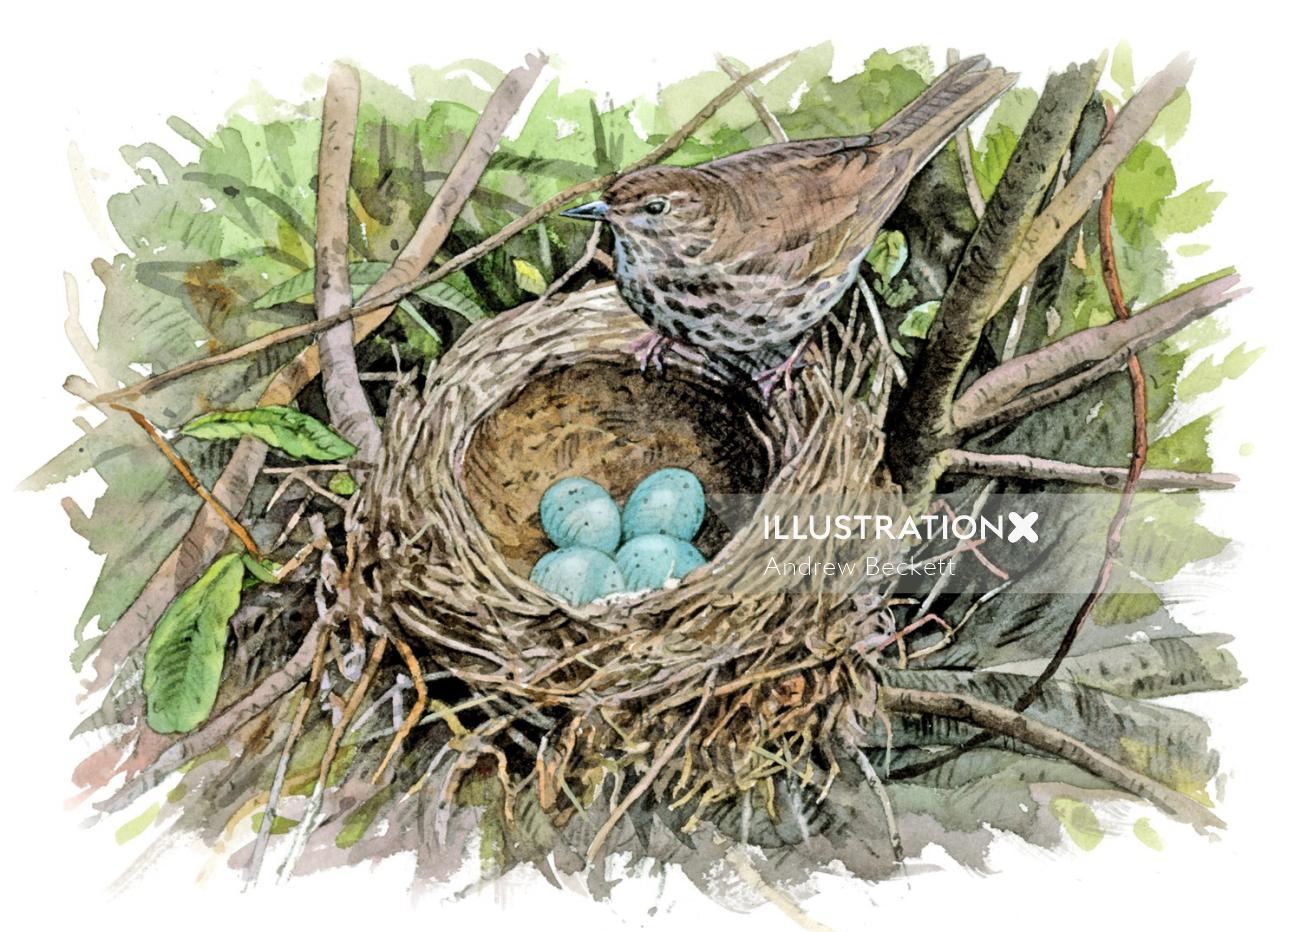 Song thrush at nest with eggs